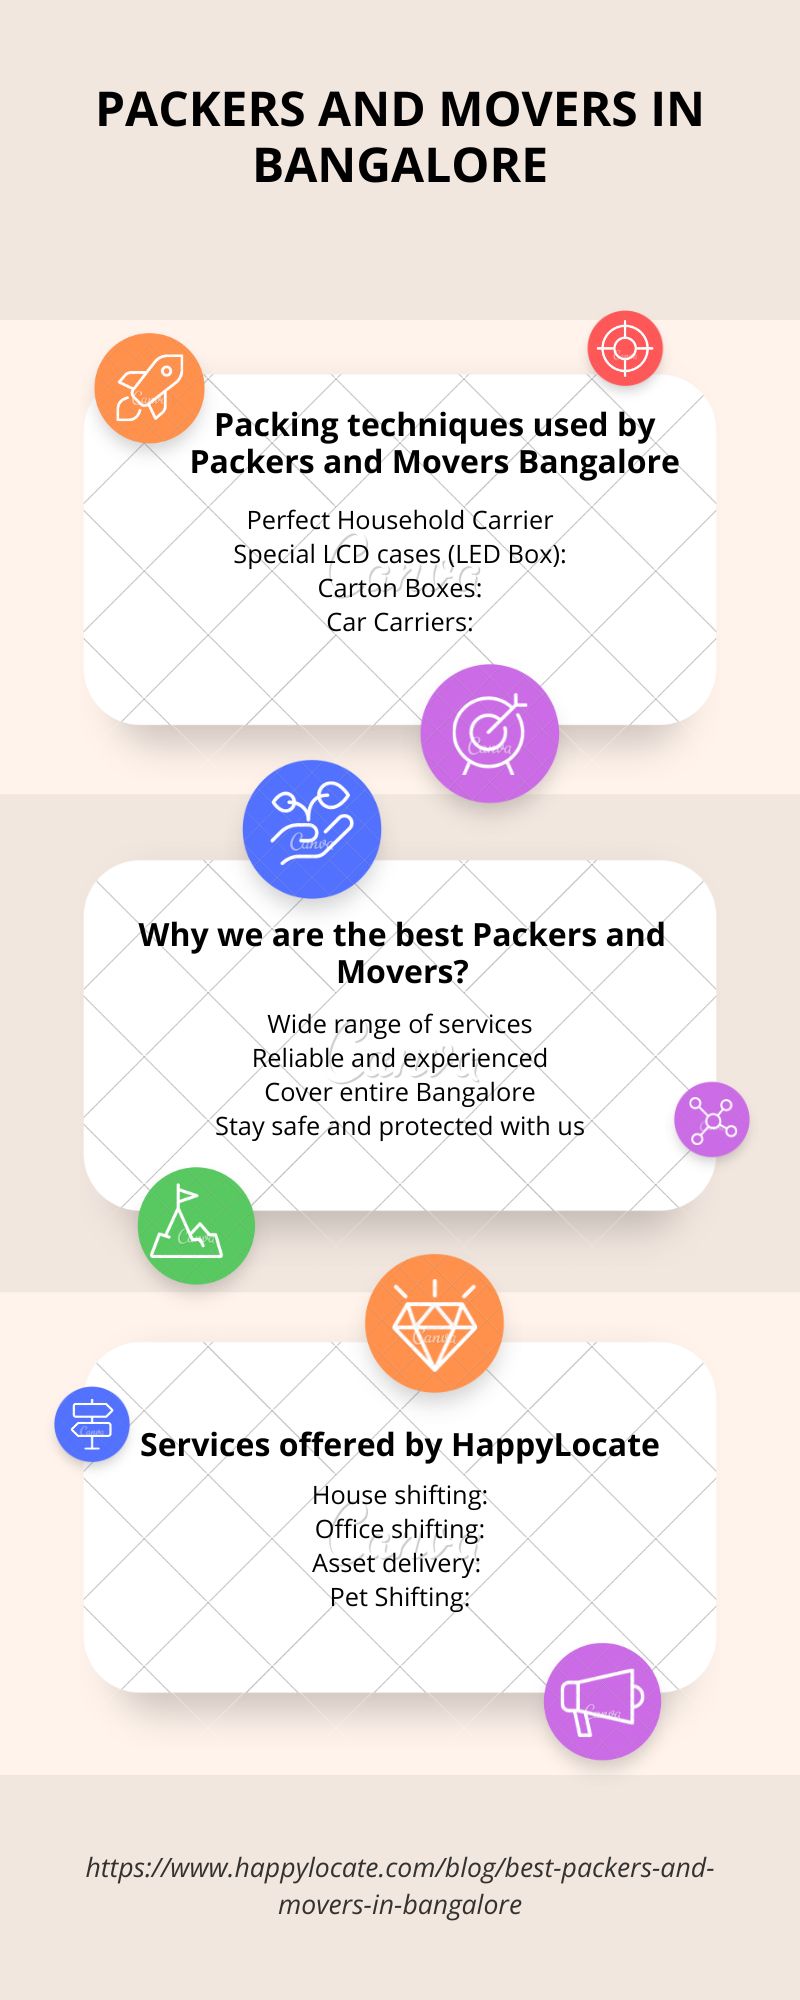 PACKERS AND MOVERS IN
BANGALORE

>

Packing techniques used by
Packers and Movers Bangalore

Perfect Household Carrier
Special LCD cases (LED Box):
Carton Boxes:

Car Carriers:

Why we are the best Packers and
Movers?

Wide range of services
Reliable and experienced

Cover entire Bangalore
Stay safe and protected with us 5d

i

Se

\4

e Services offered by HappyLocate
House shifting:
Office shifting:
Asset delivery:
Pet Shifting:

GF

https://www.happylocate.com/blog/best-packers-and-
movers-in-bangalore